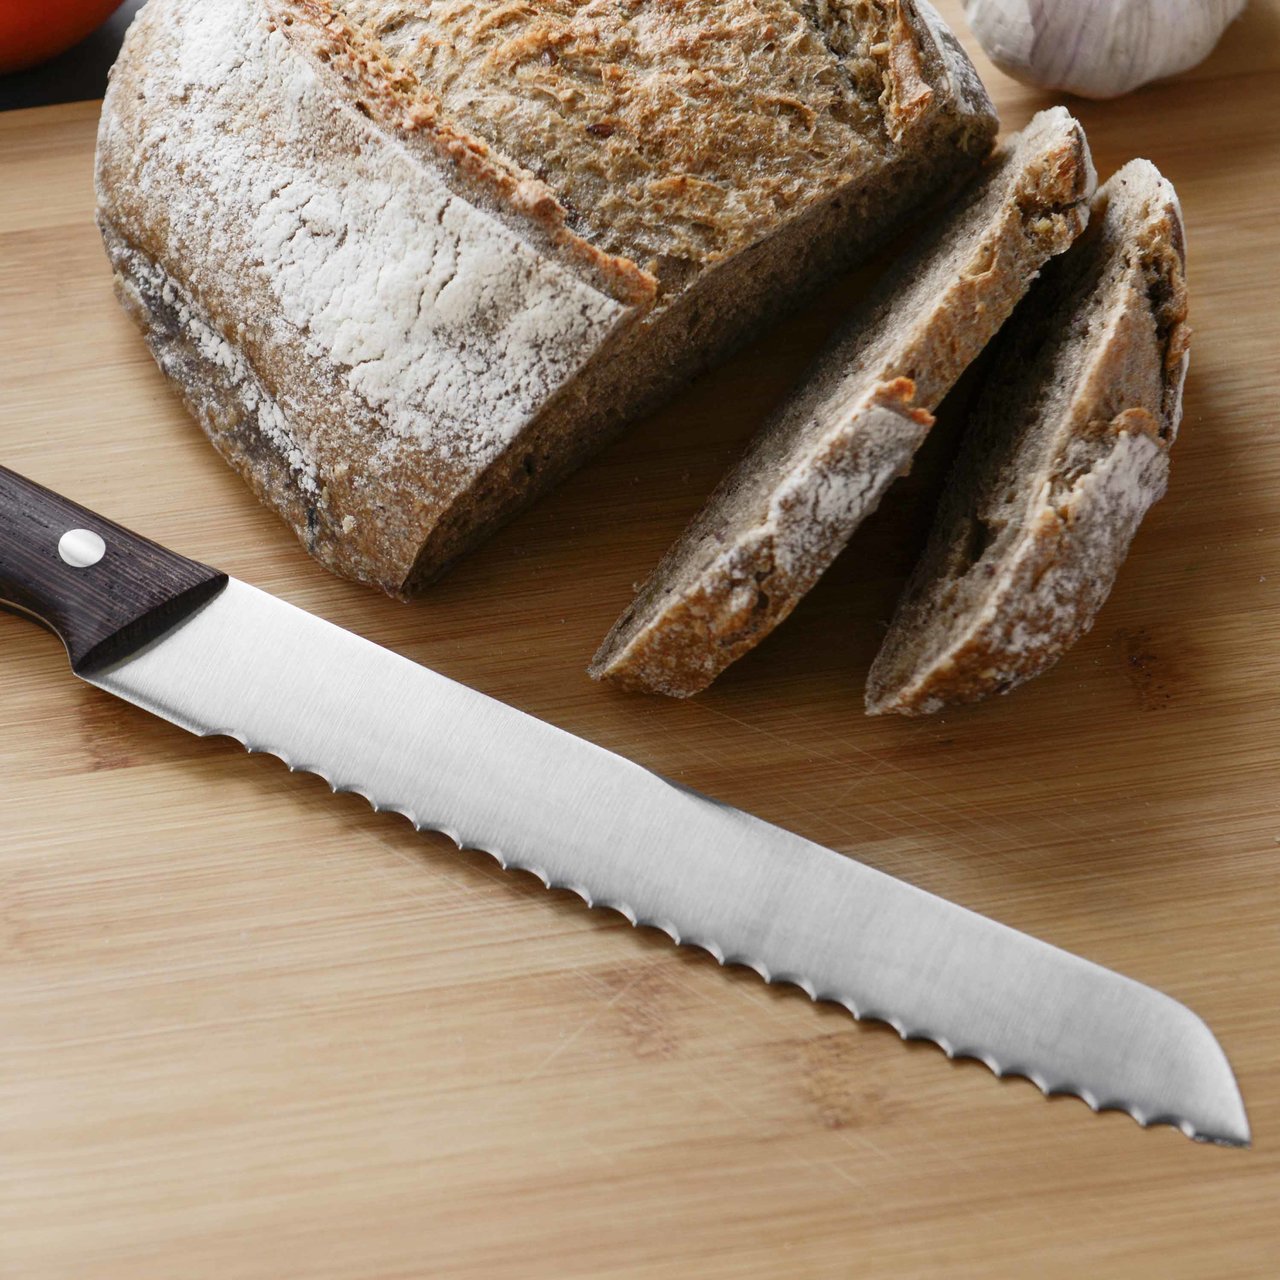 What types of bread knives are there?